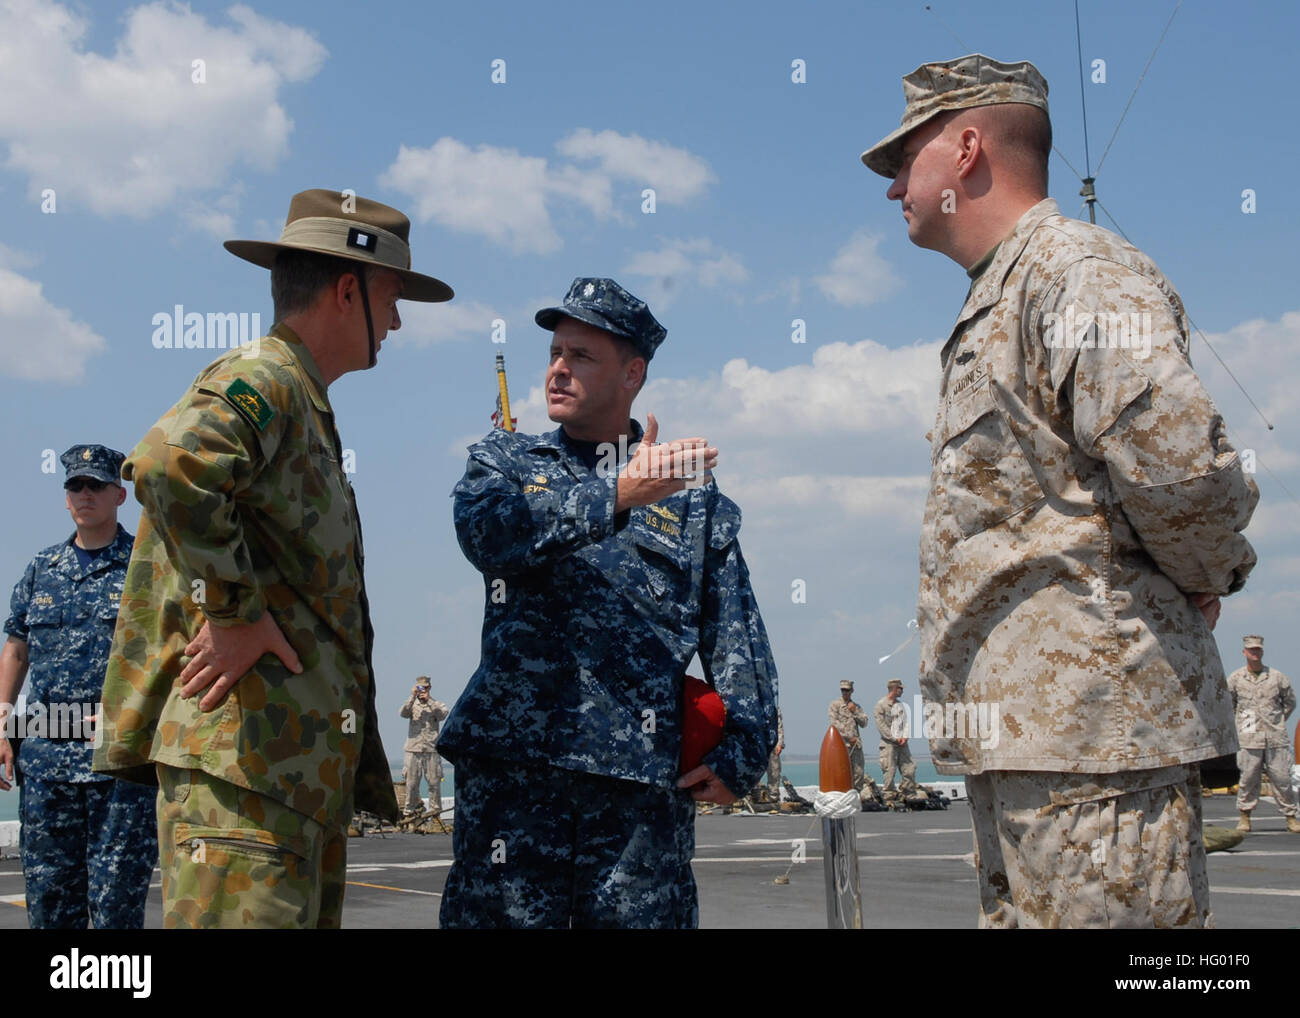 110902-N-UT455-249  DARWIN, Australia (Sept. 2, 2011) Cmdr. Kevin P. Meyers, center, commanding officer of the amphibious transport dock ship USS Green Bay (LPD 20), introduces Australian army Major Gen. Rick Burr, left, to Lt. Col. Craig Wonson, commanding officer of Battalion Landing Team, 1st Battalion, First Marine Regiment. Green Bay is underway in the U.S. 7th Fleet area of responsibility during its first western Pacific deployment. (U.S. Navy photo by Mass Communication Specialist 1st Class Larry S. Carlson/Released) US Navy 110902-N-UT455-211 Cmdr. Kevin P. Meyers, center, commanding o Stock Photo